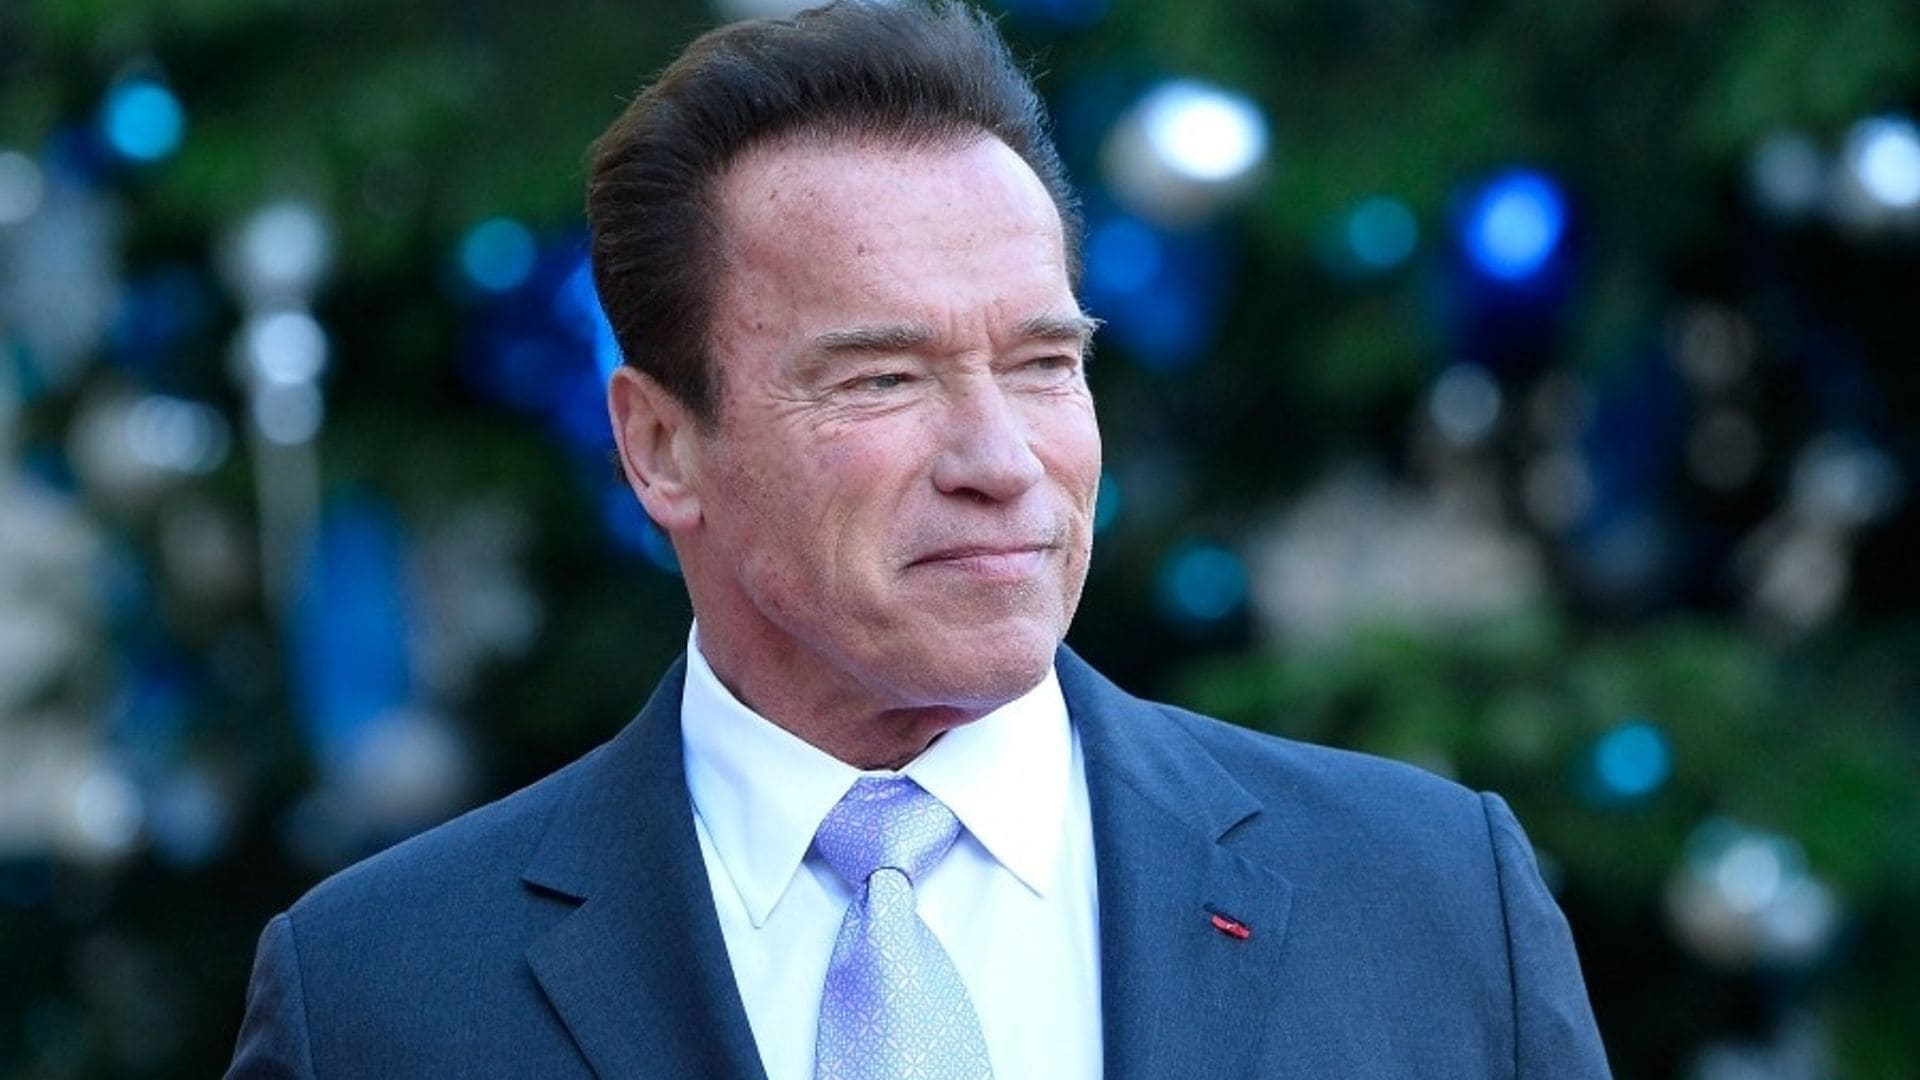 Arnold Schwarzenegger underwent emergency open-heart surgery on Thursday, March 29. The 70-year-old actor went to Cedars-Sinai hospital in L.A. for a catheter valve replacement according to TMZ. However, the star experienced complications during the somewhat experimental procedure when the valve replacement failed. Doctors then quickly decided to perform emergency heart surgery.
Photo: Getty Images